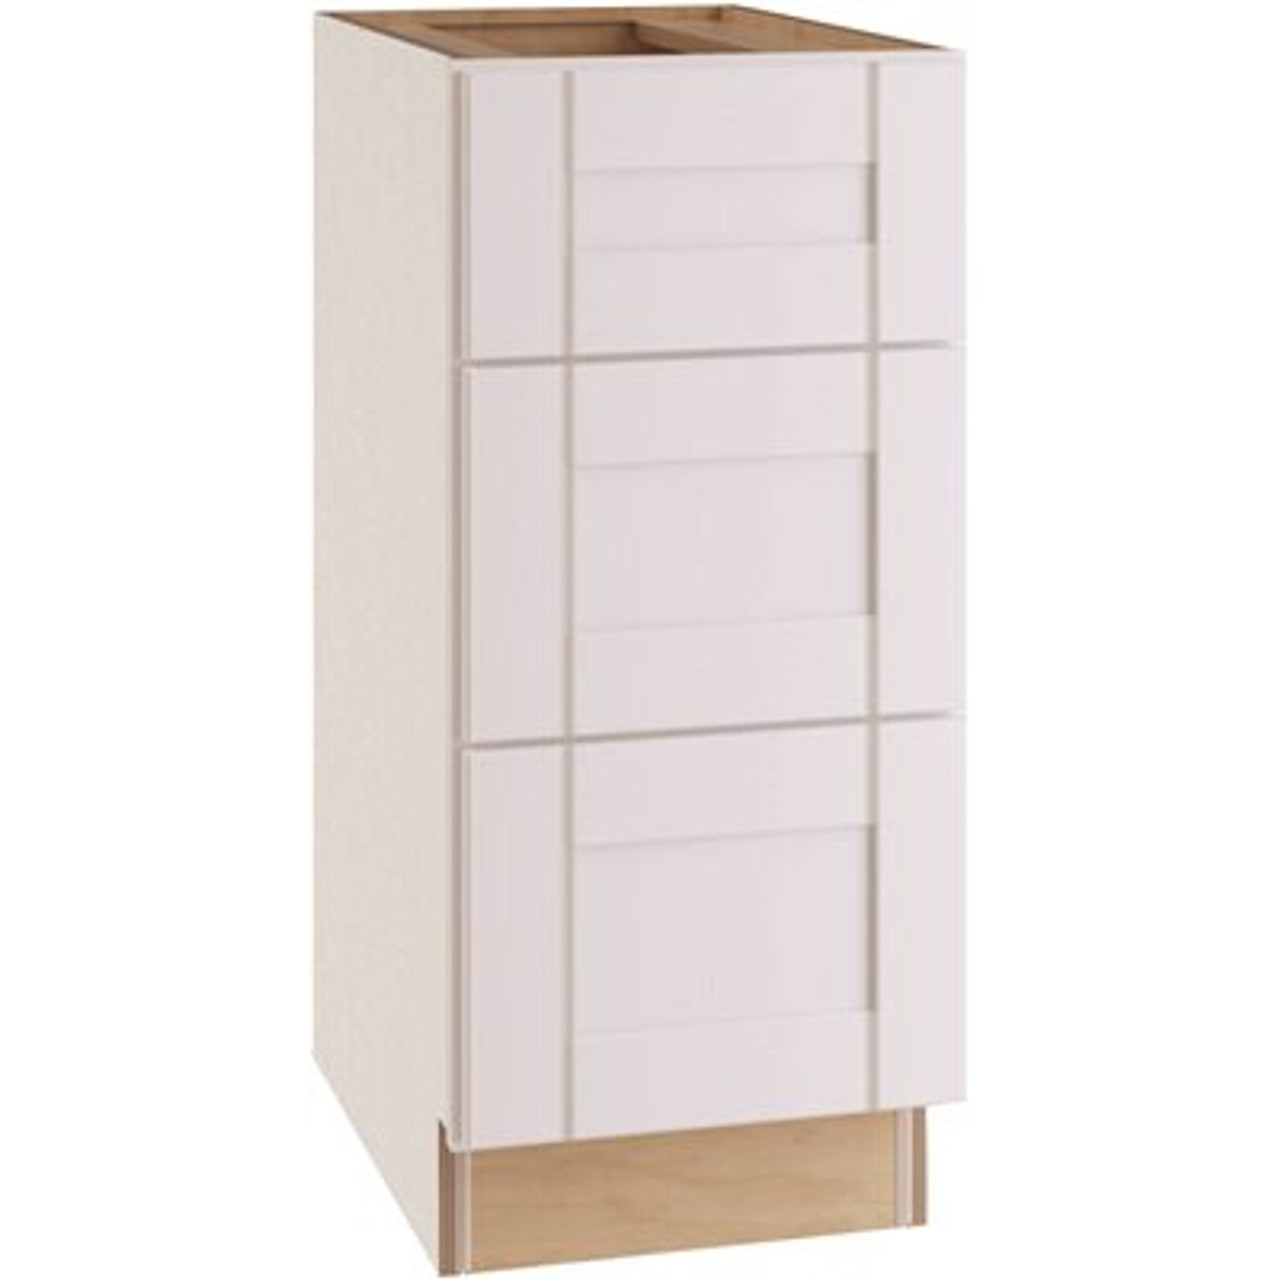 Arlington Vesper White Plywood Shaker Stock Assembled Base Drawer Kitchen Cabinet Soft Close 12 In. X 34.5 In. X 21 In.